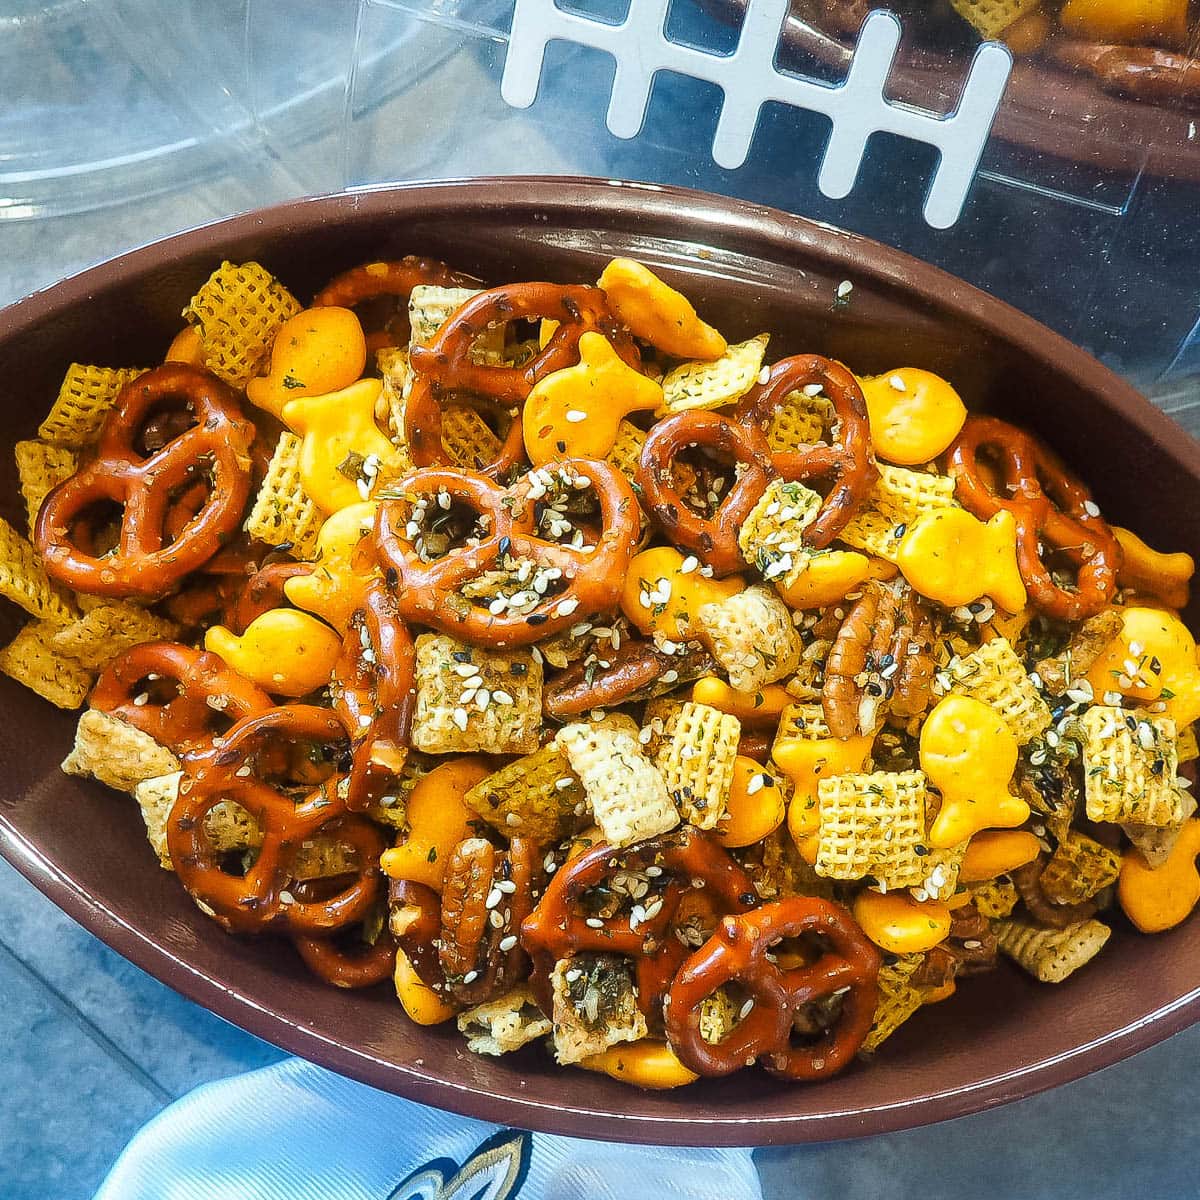 A football shaped bowl of chex party mix with pretzels, chex, and goldfish.